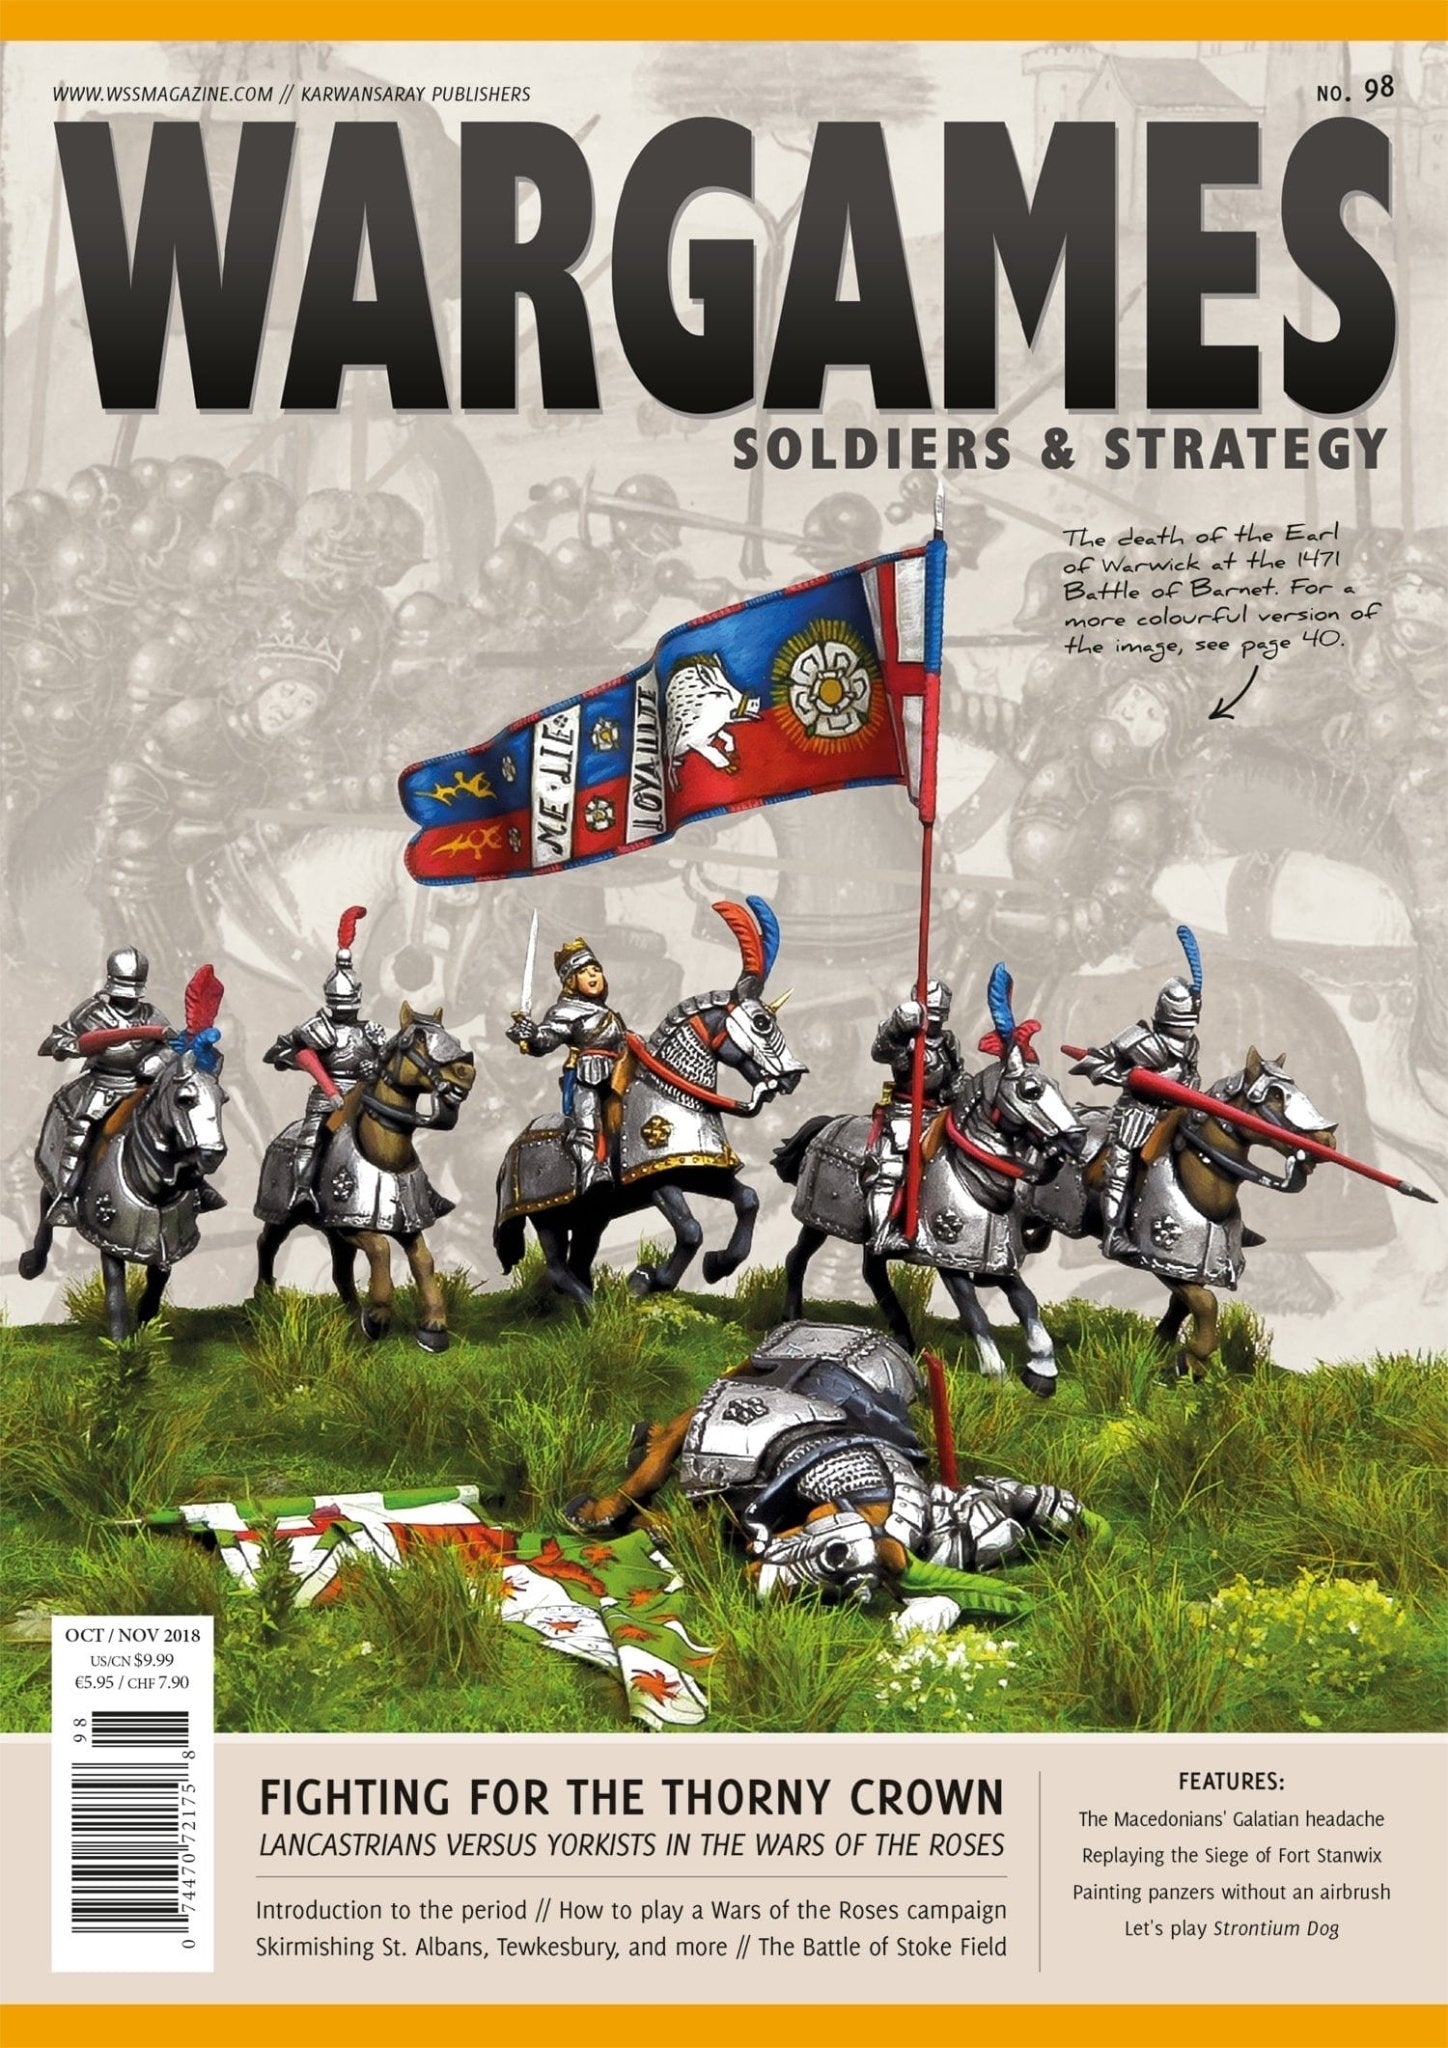 Karwansaray BV Print, Paper Wargames, Soldiers and Strategy 98